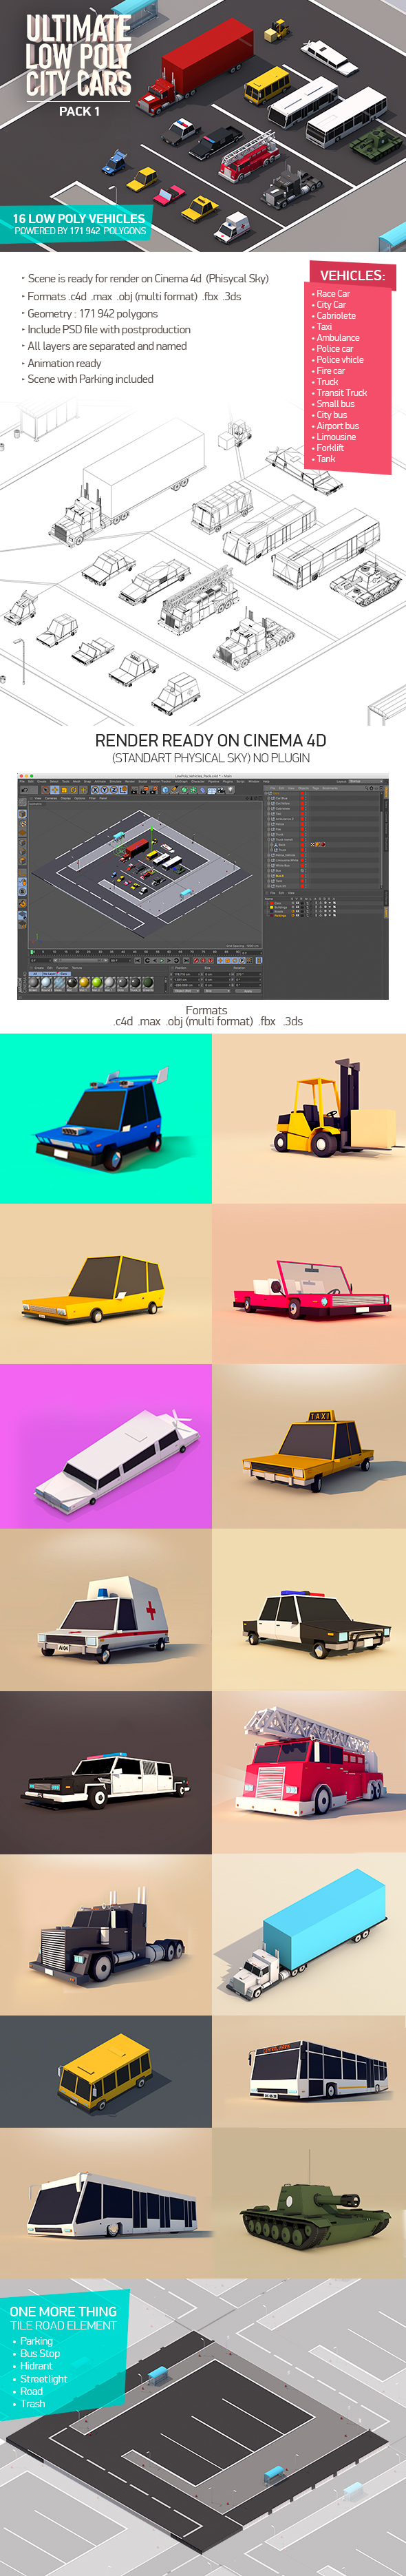 Ultimate Low Poly City Cars Pack